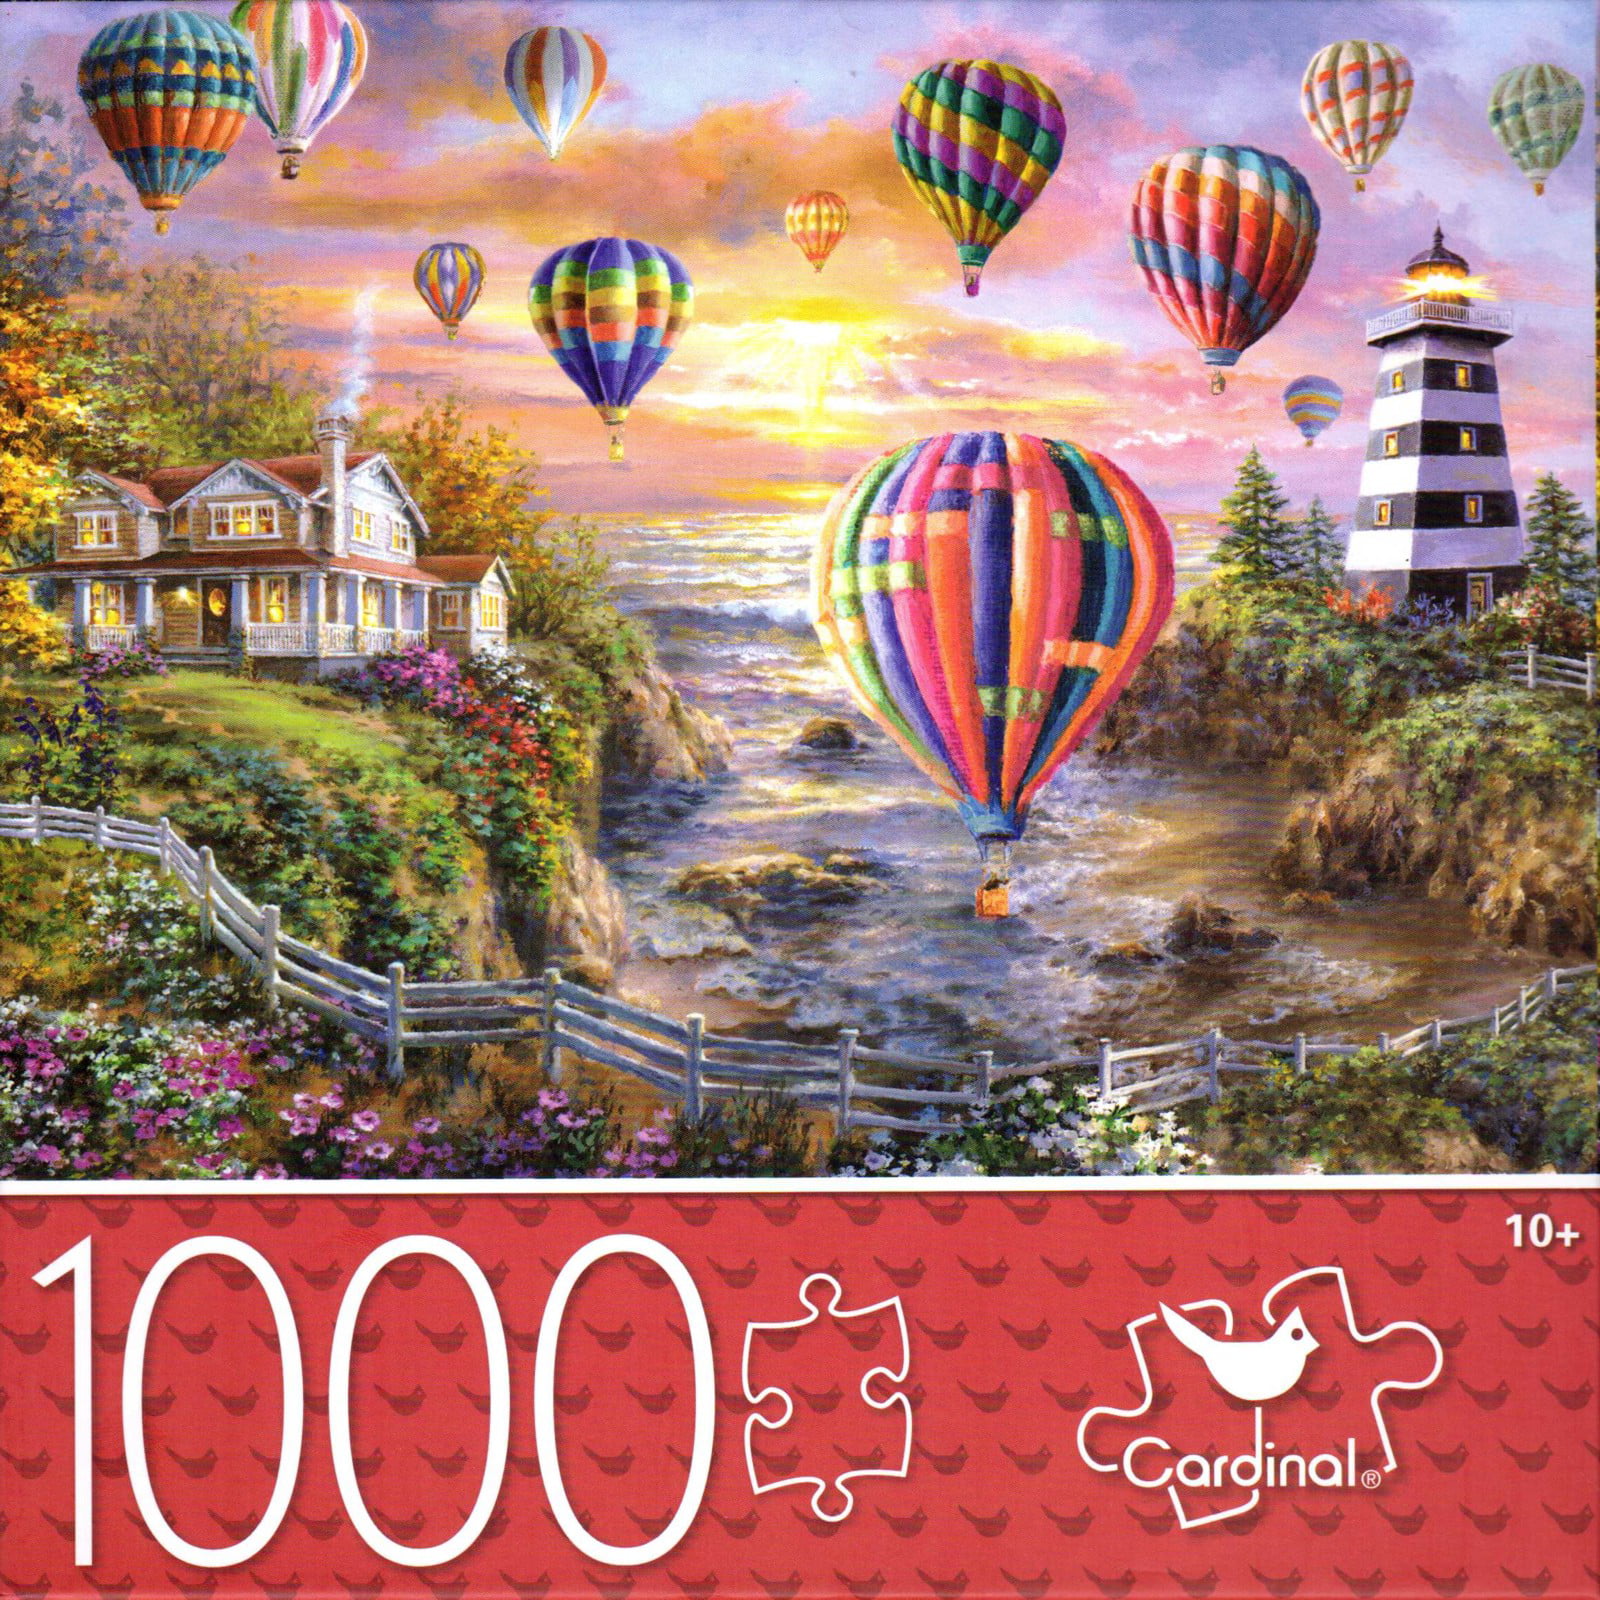 3 NEW Cardinal 300 piece Puzzle Hot Air Balloons Bicycles Vegetables C324 